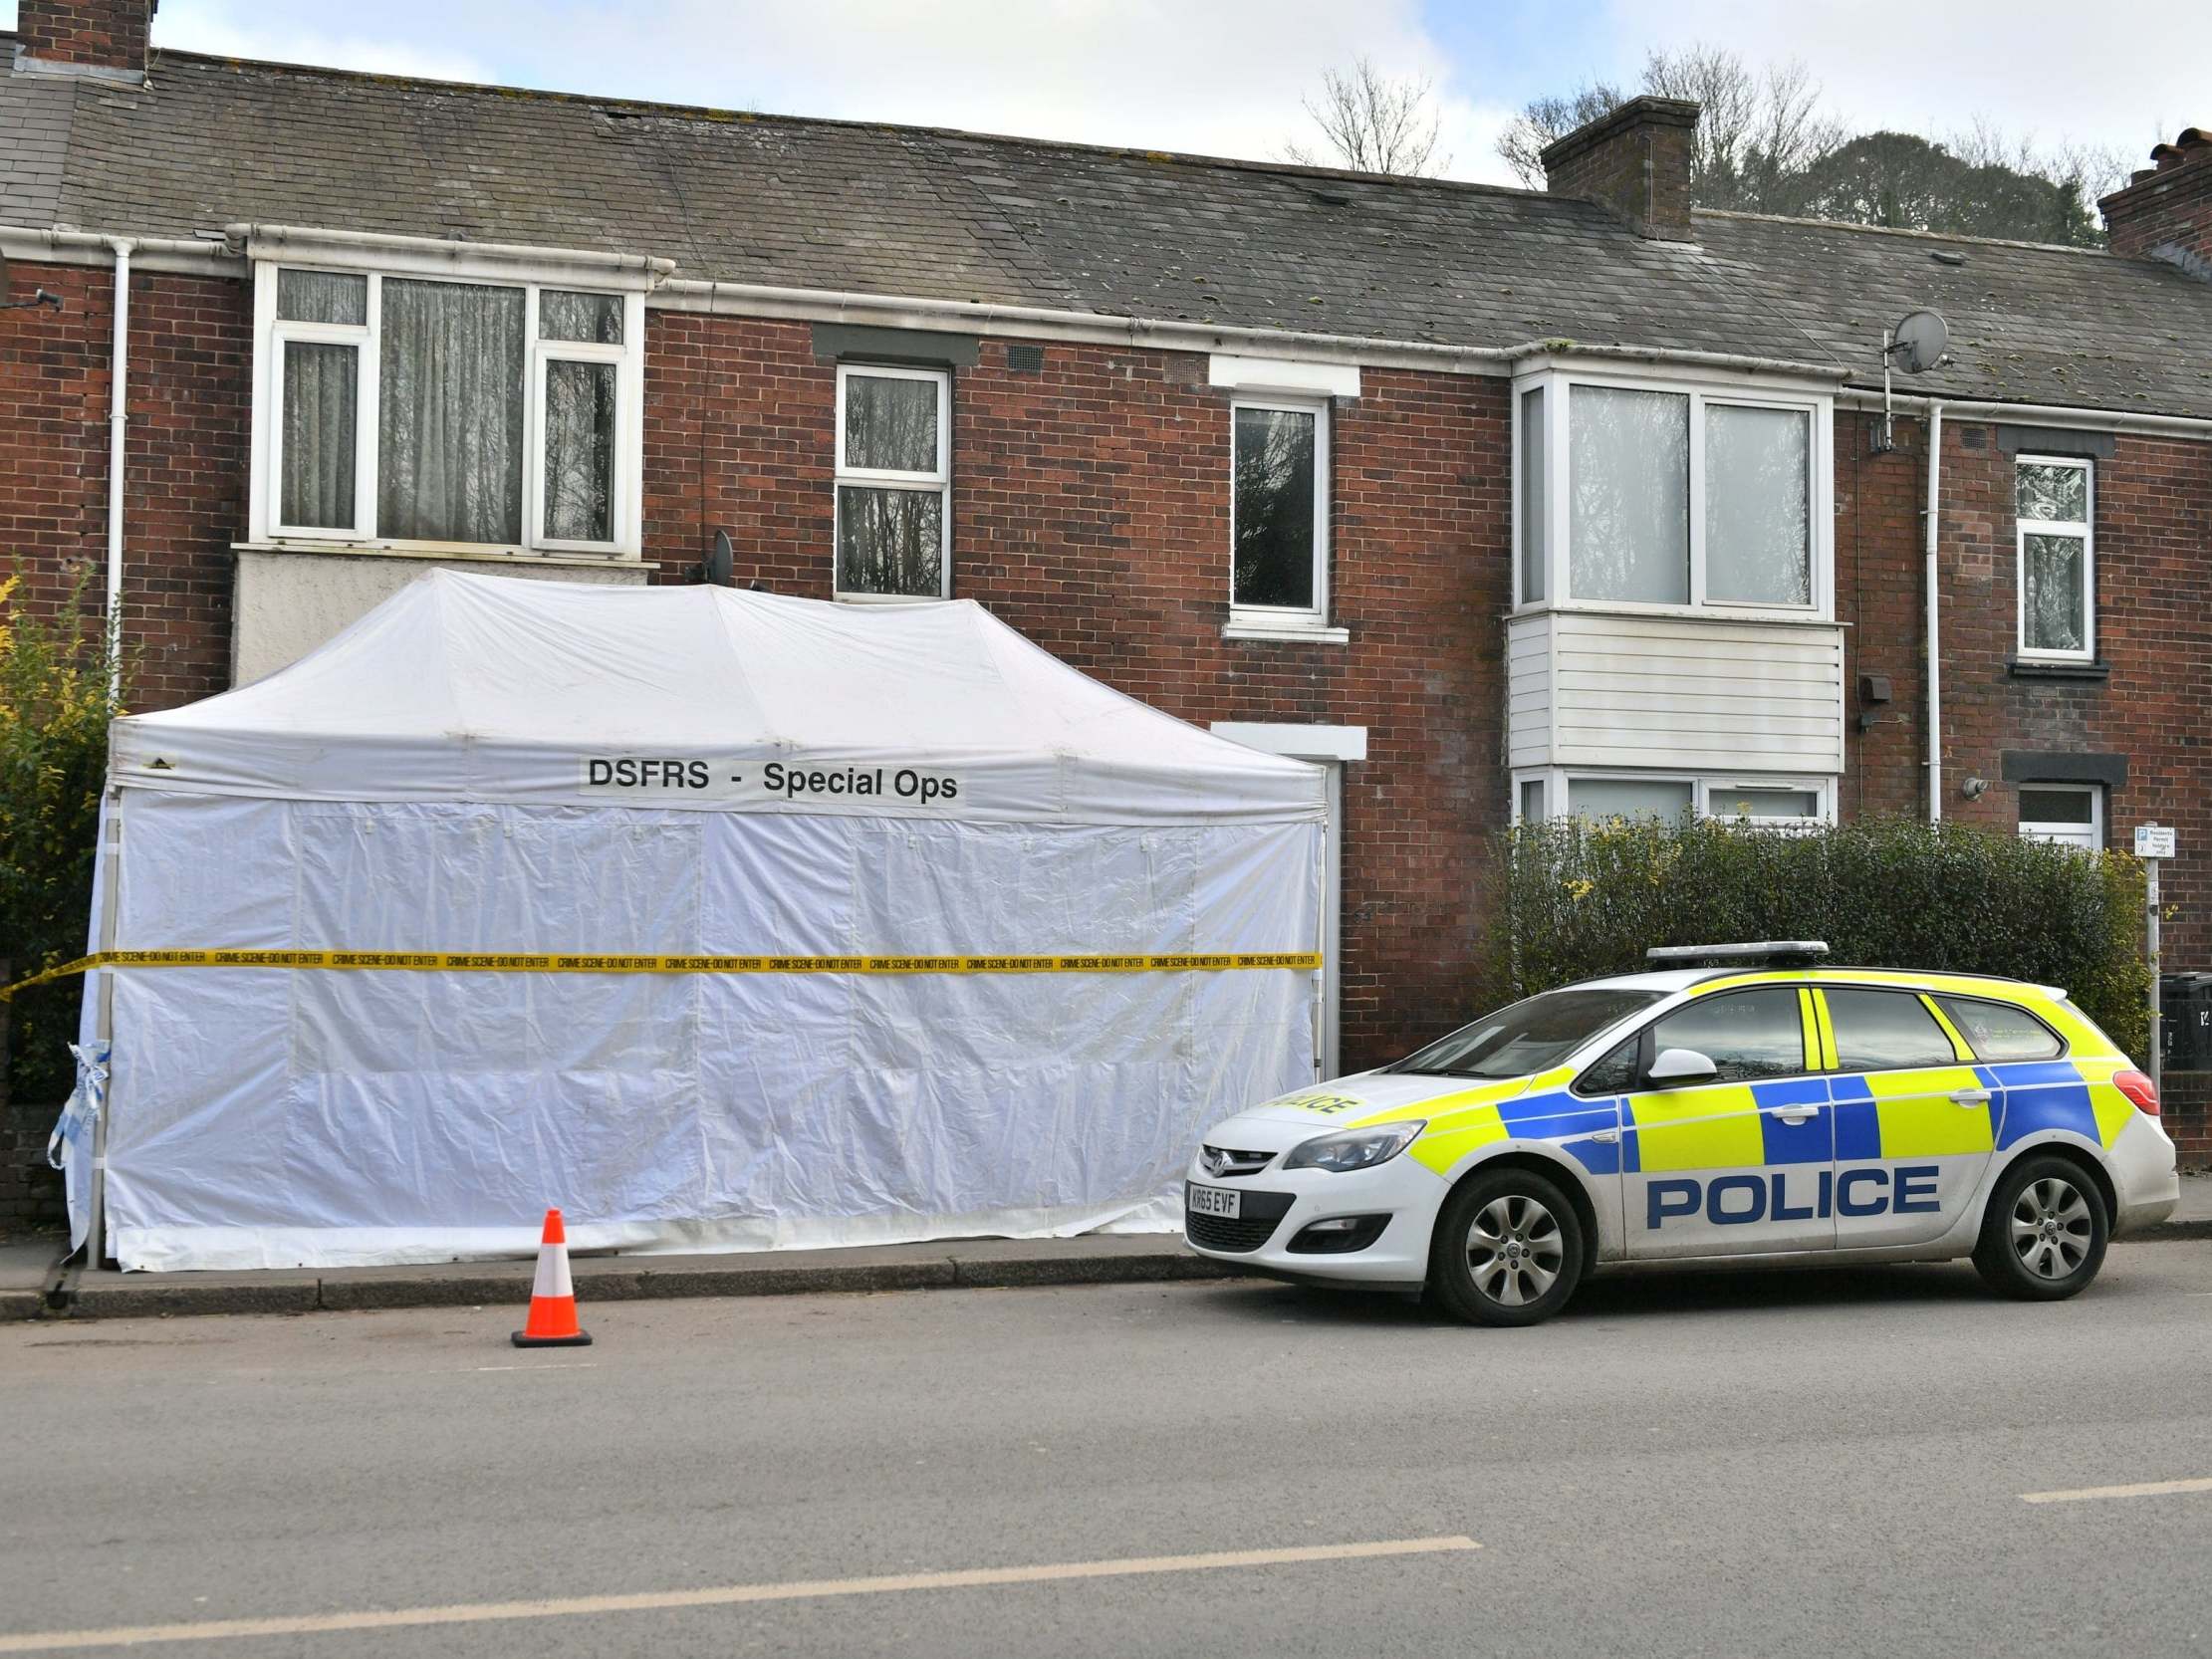 The scene in Bonhay Road, Exeter, Devon, where the body of Anthony Payne, 80, was discovered on 11 February, 2019.